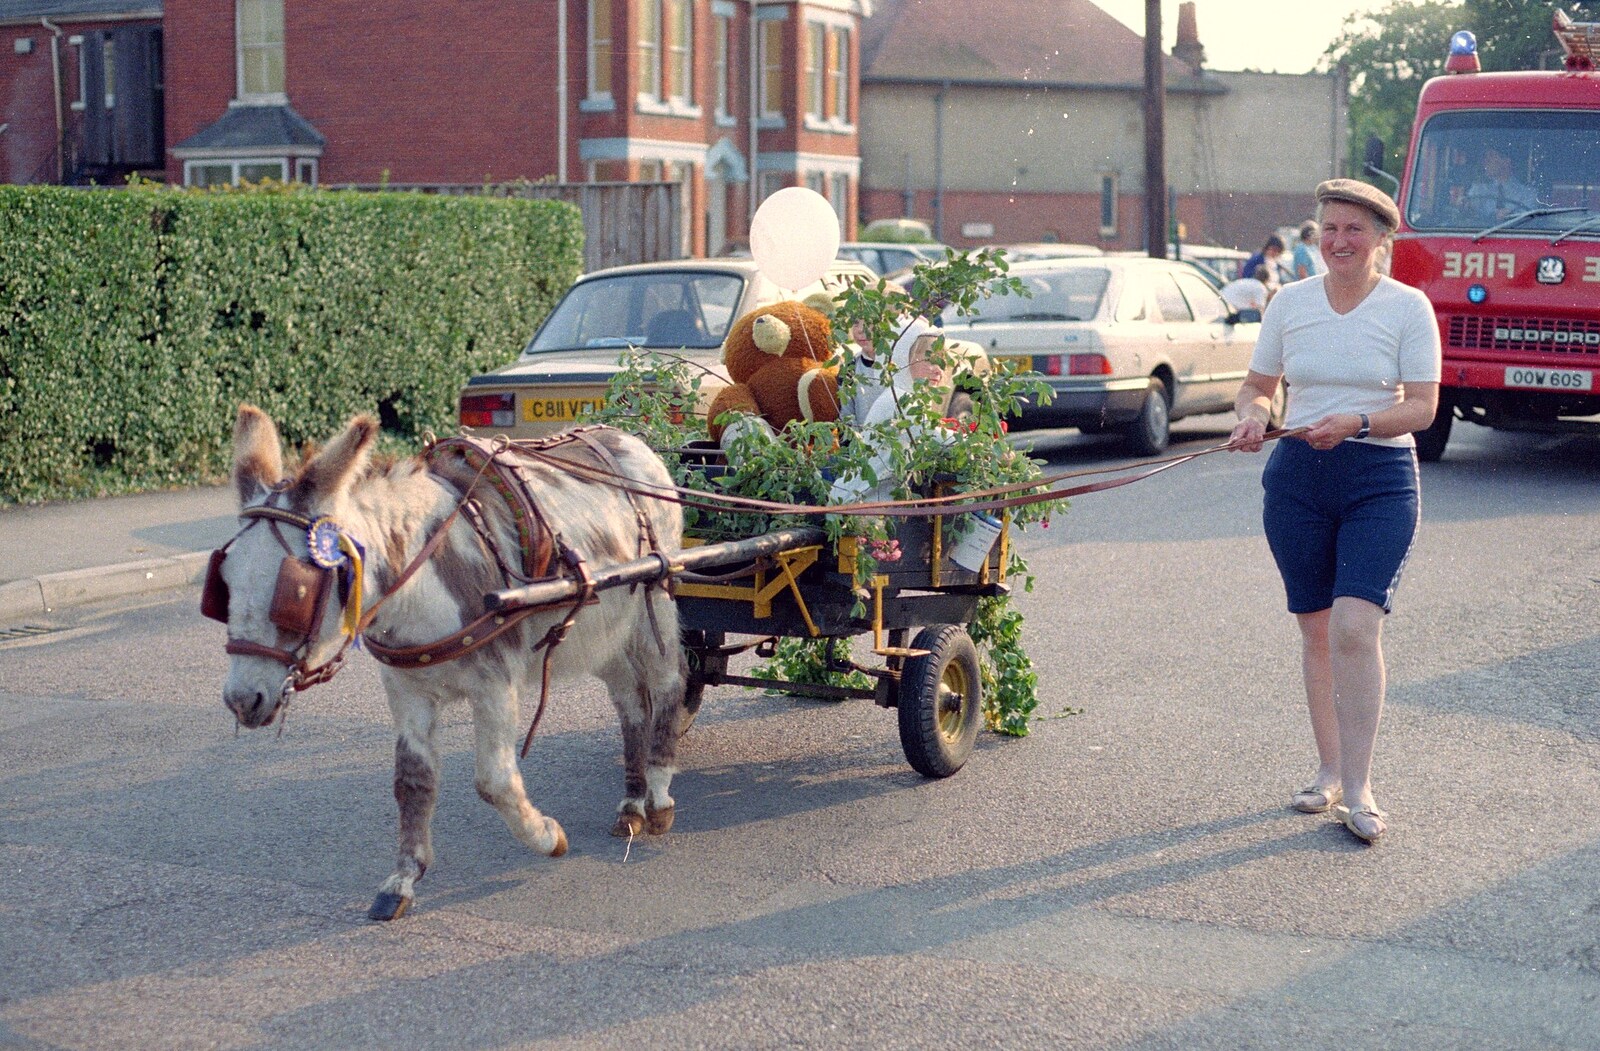 A small donkey pulls a cart dressed as a tree from Sean and the New Milton Carnival, Hampshire - 1st August 1986